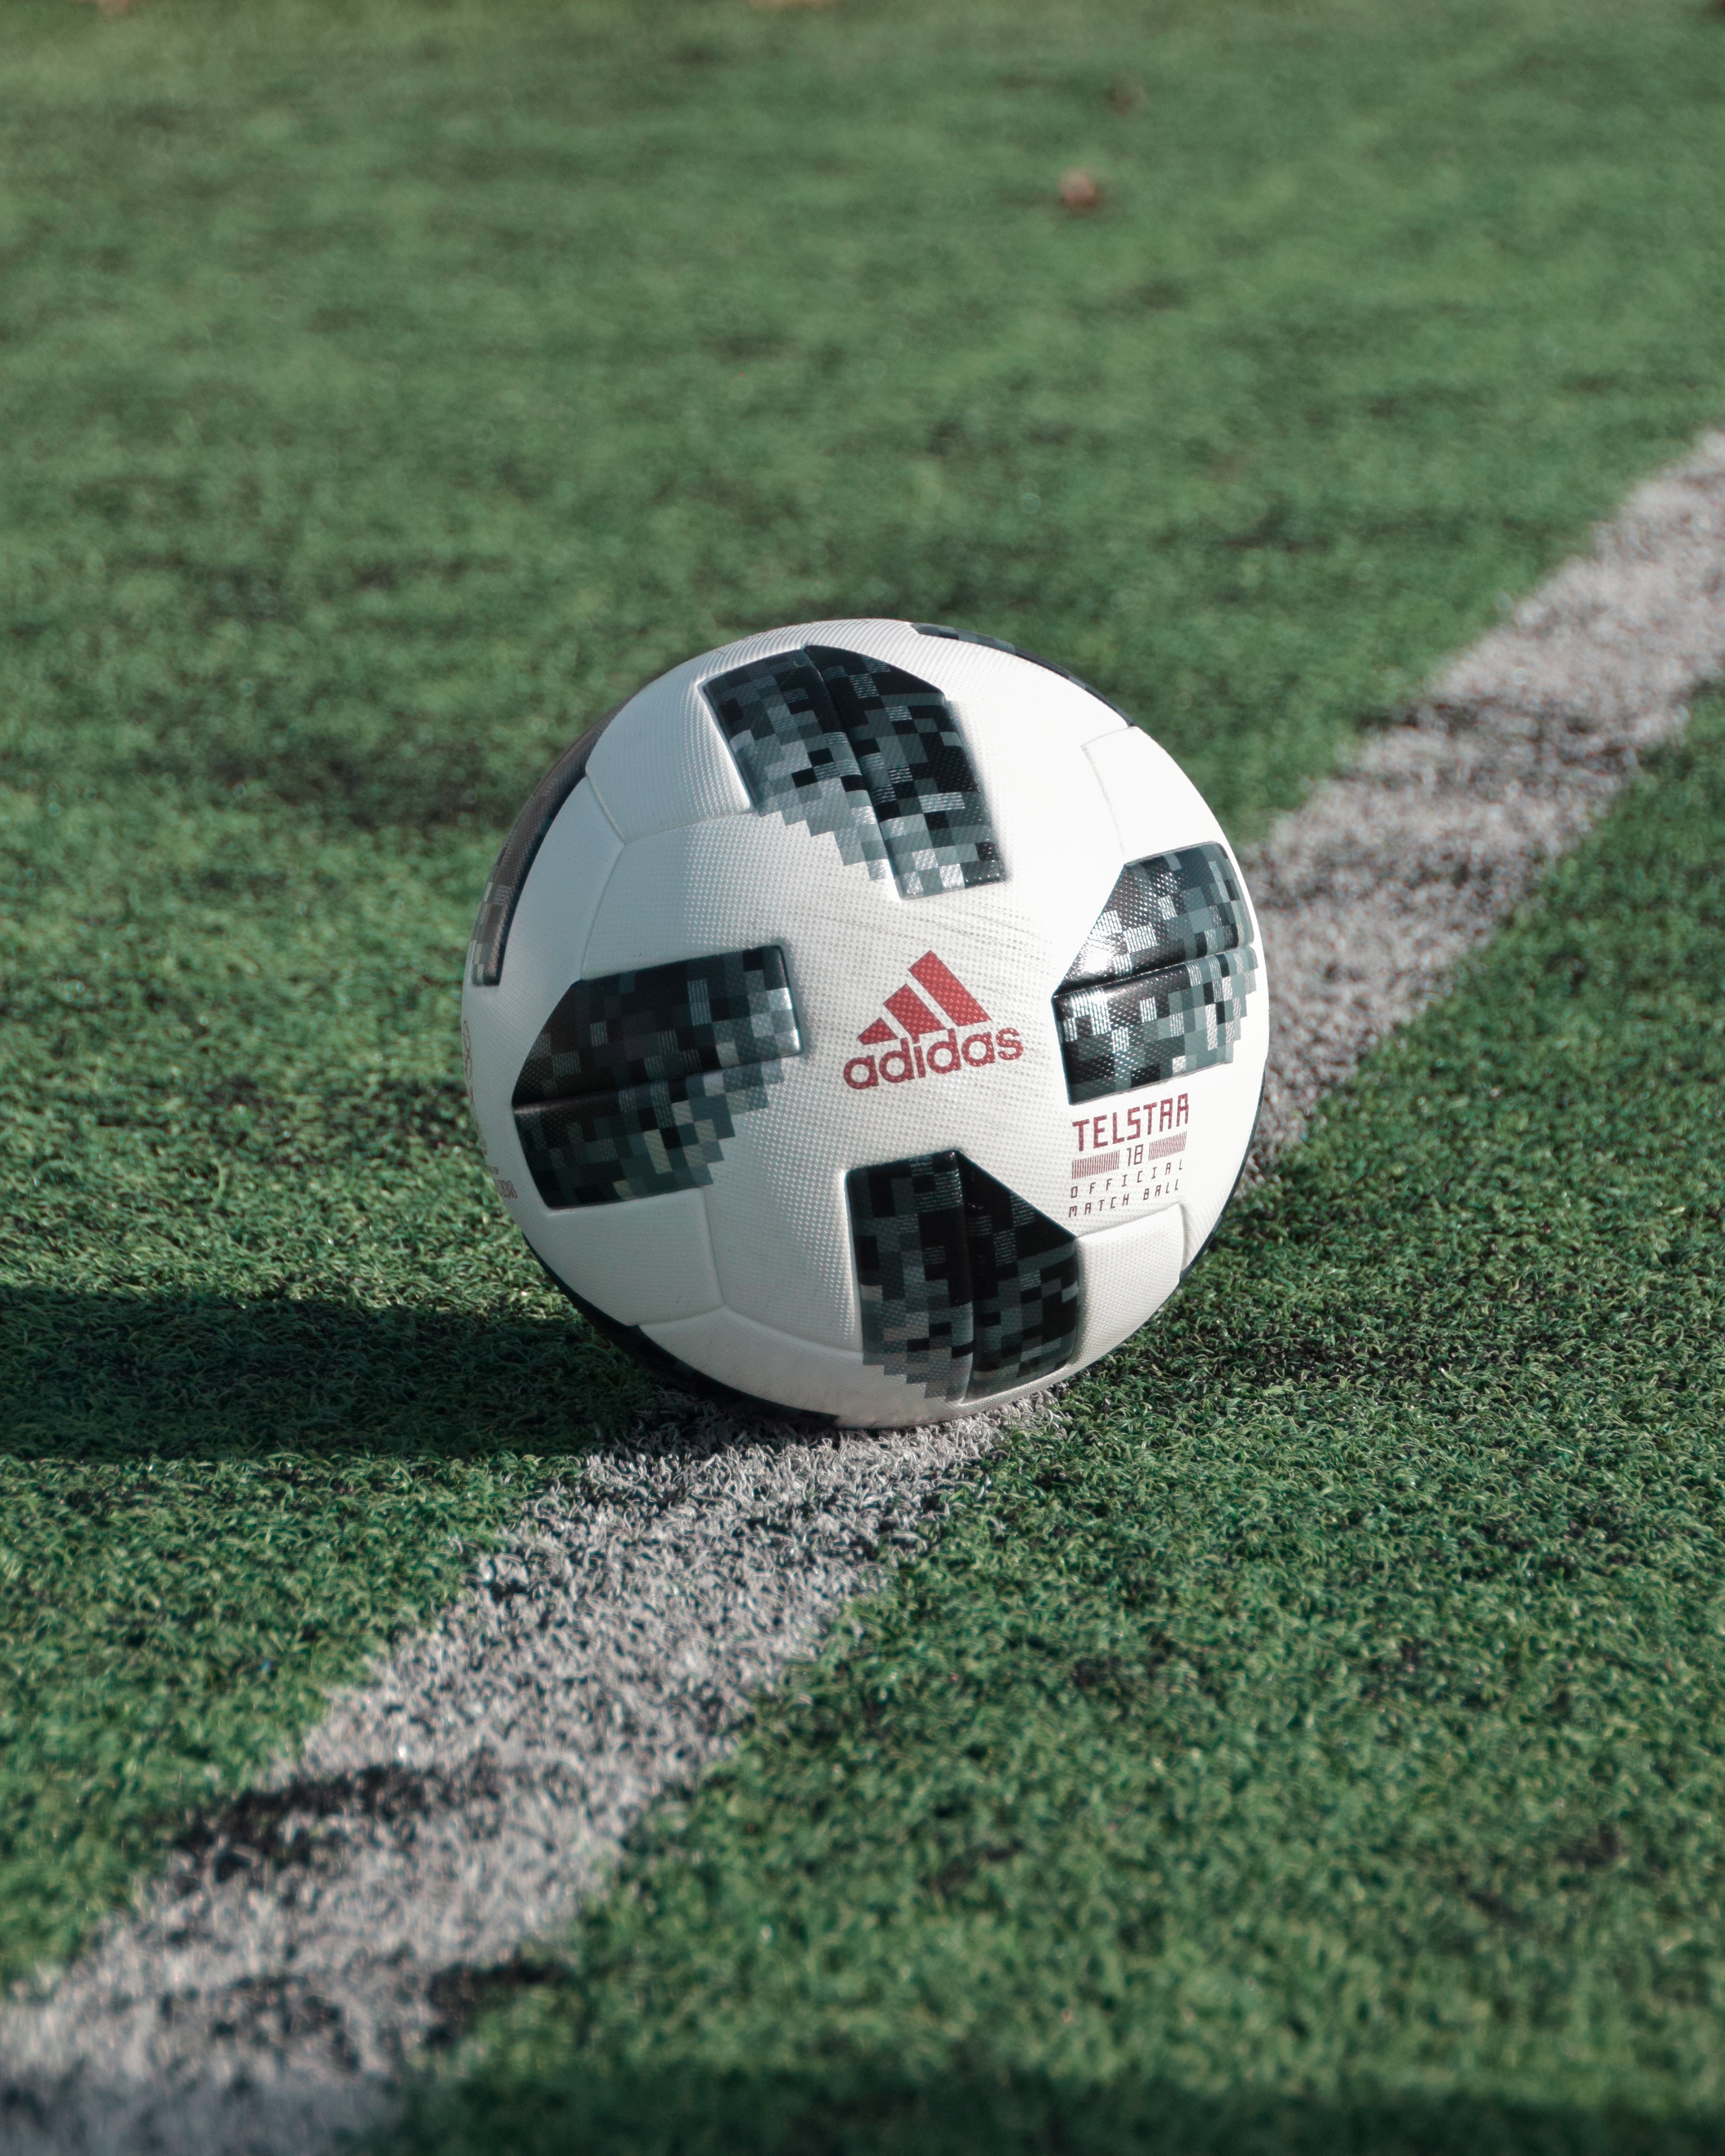 Stats Entertainment:  The Legal and Regulatory Issues Arising from the Data Analytics Movement in Association Football.  Part Two: Data Privacy, the Broader Legal Context, and Conclusions of the Legal Aspects of Data Analytics in Football